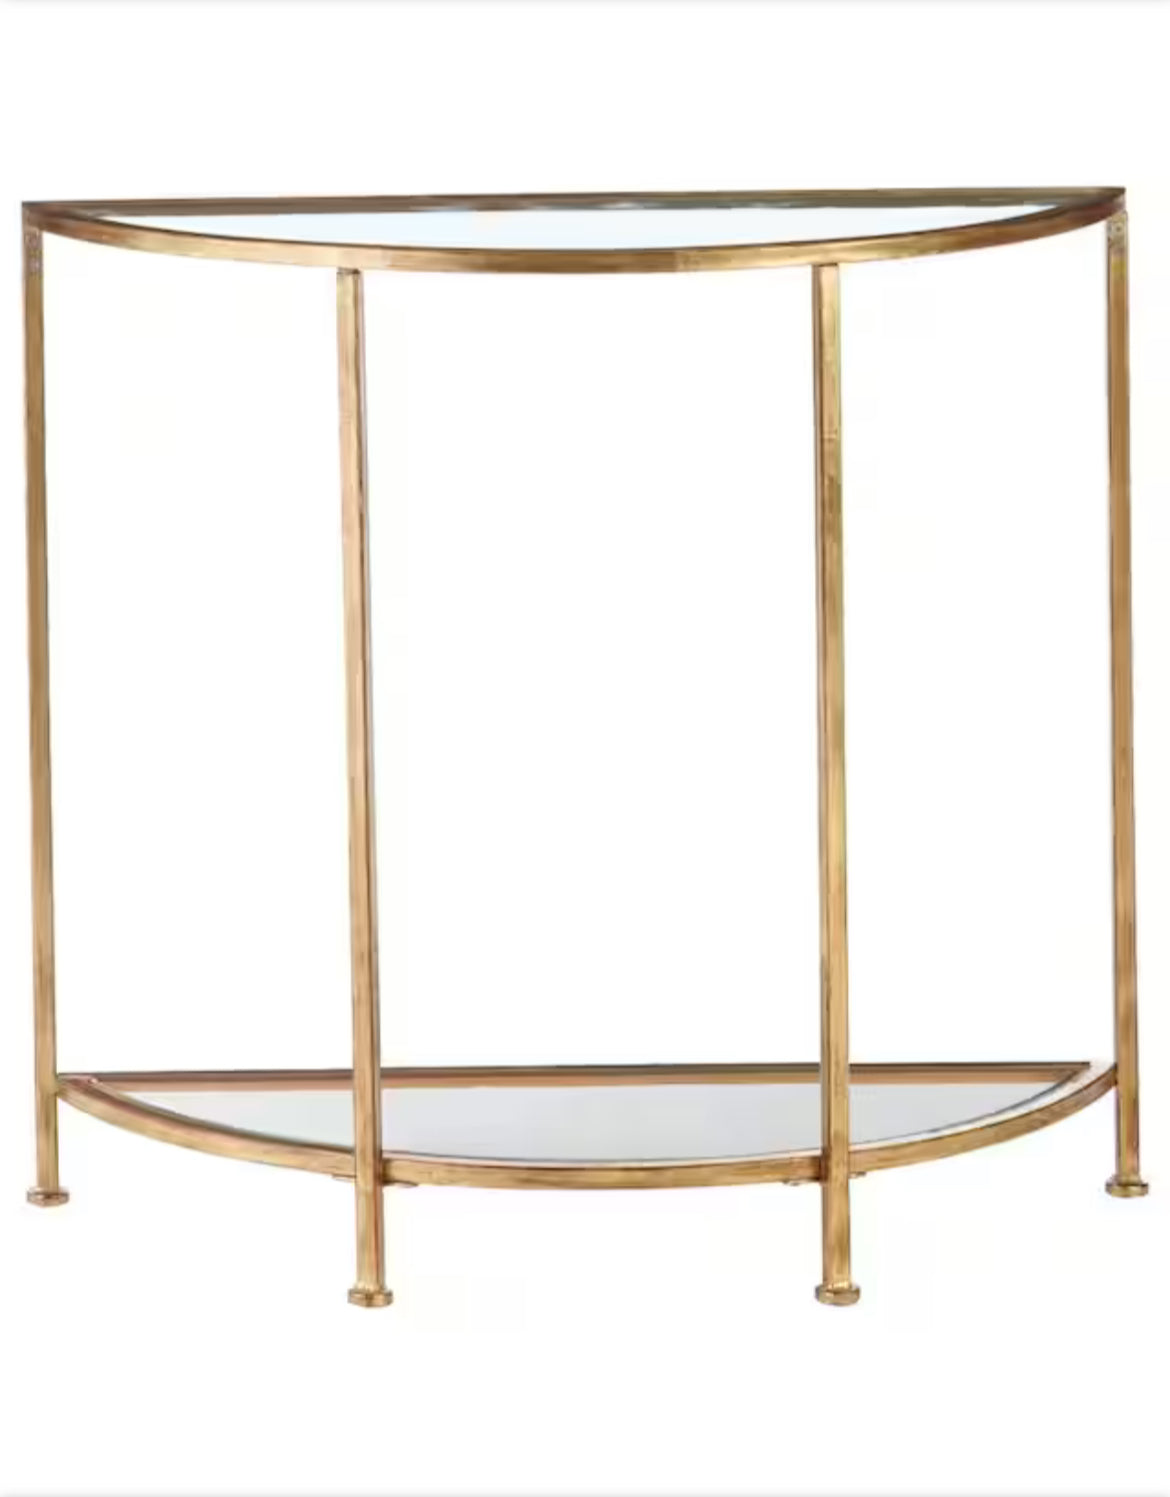 Home Decorators Collection
Bella 32 in. Gold Leaf/Clear Standard Half Moon Glass Console Table with Storage